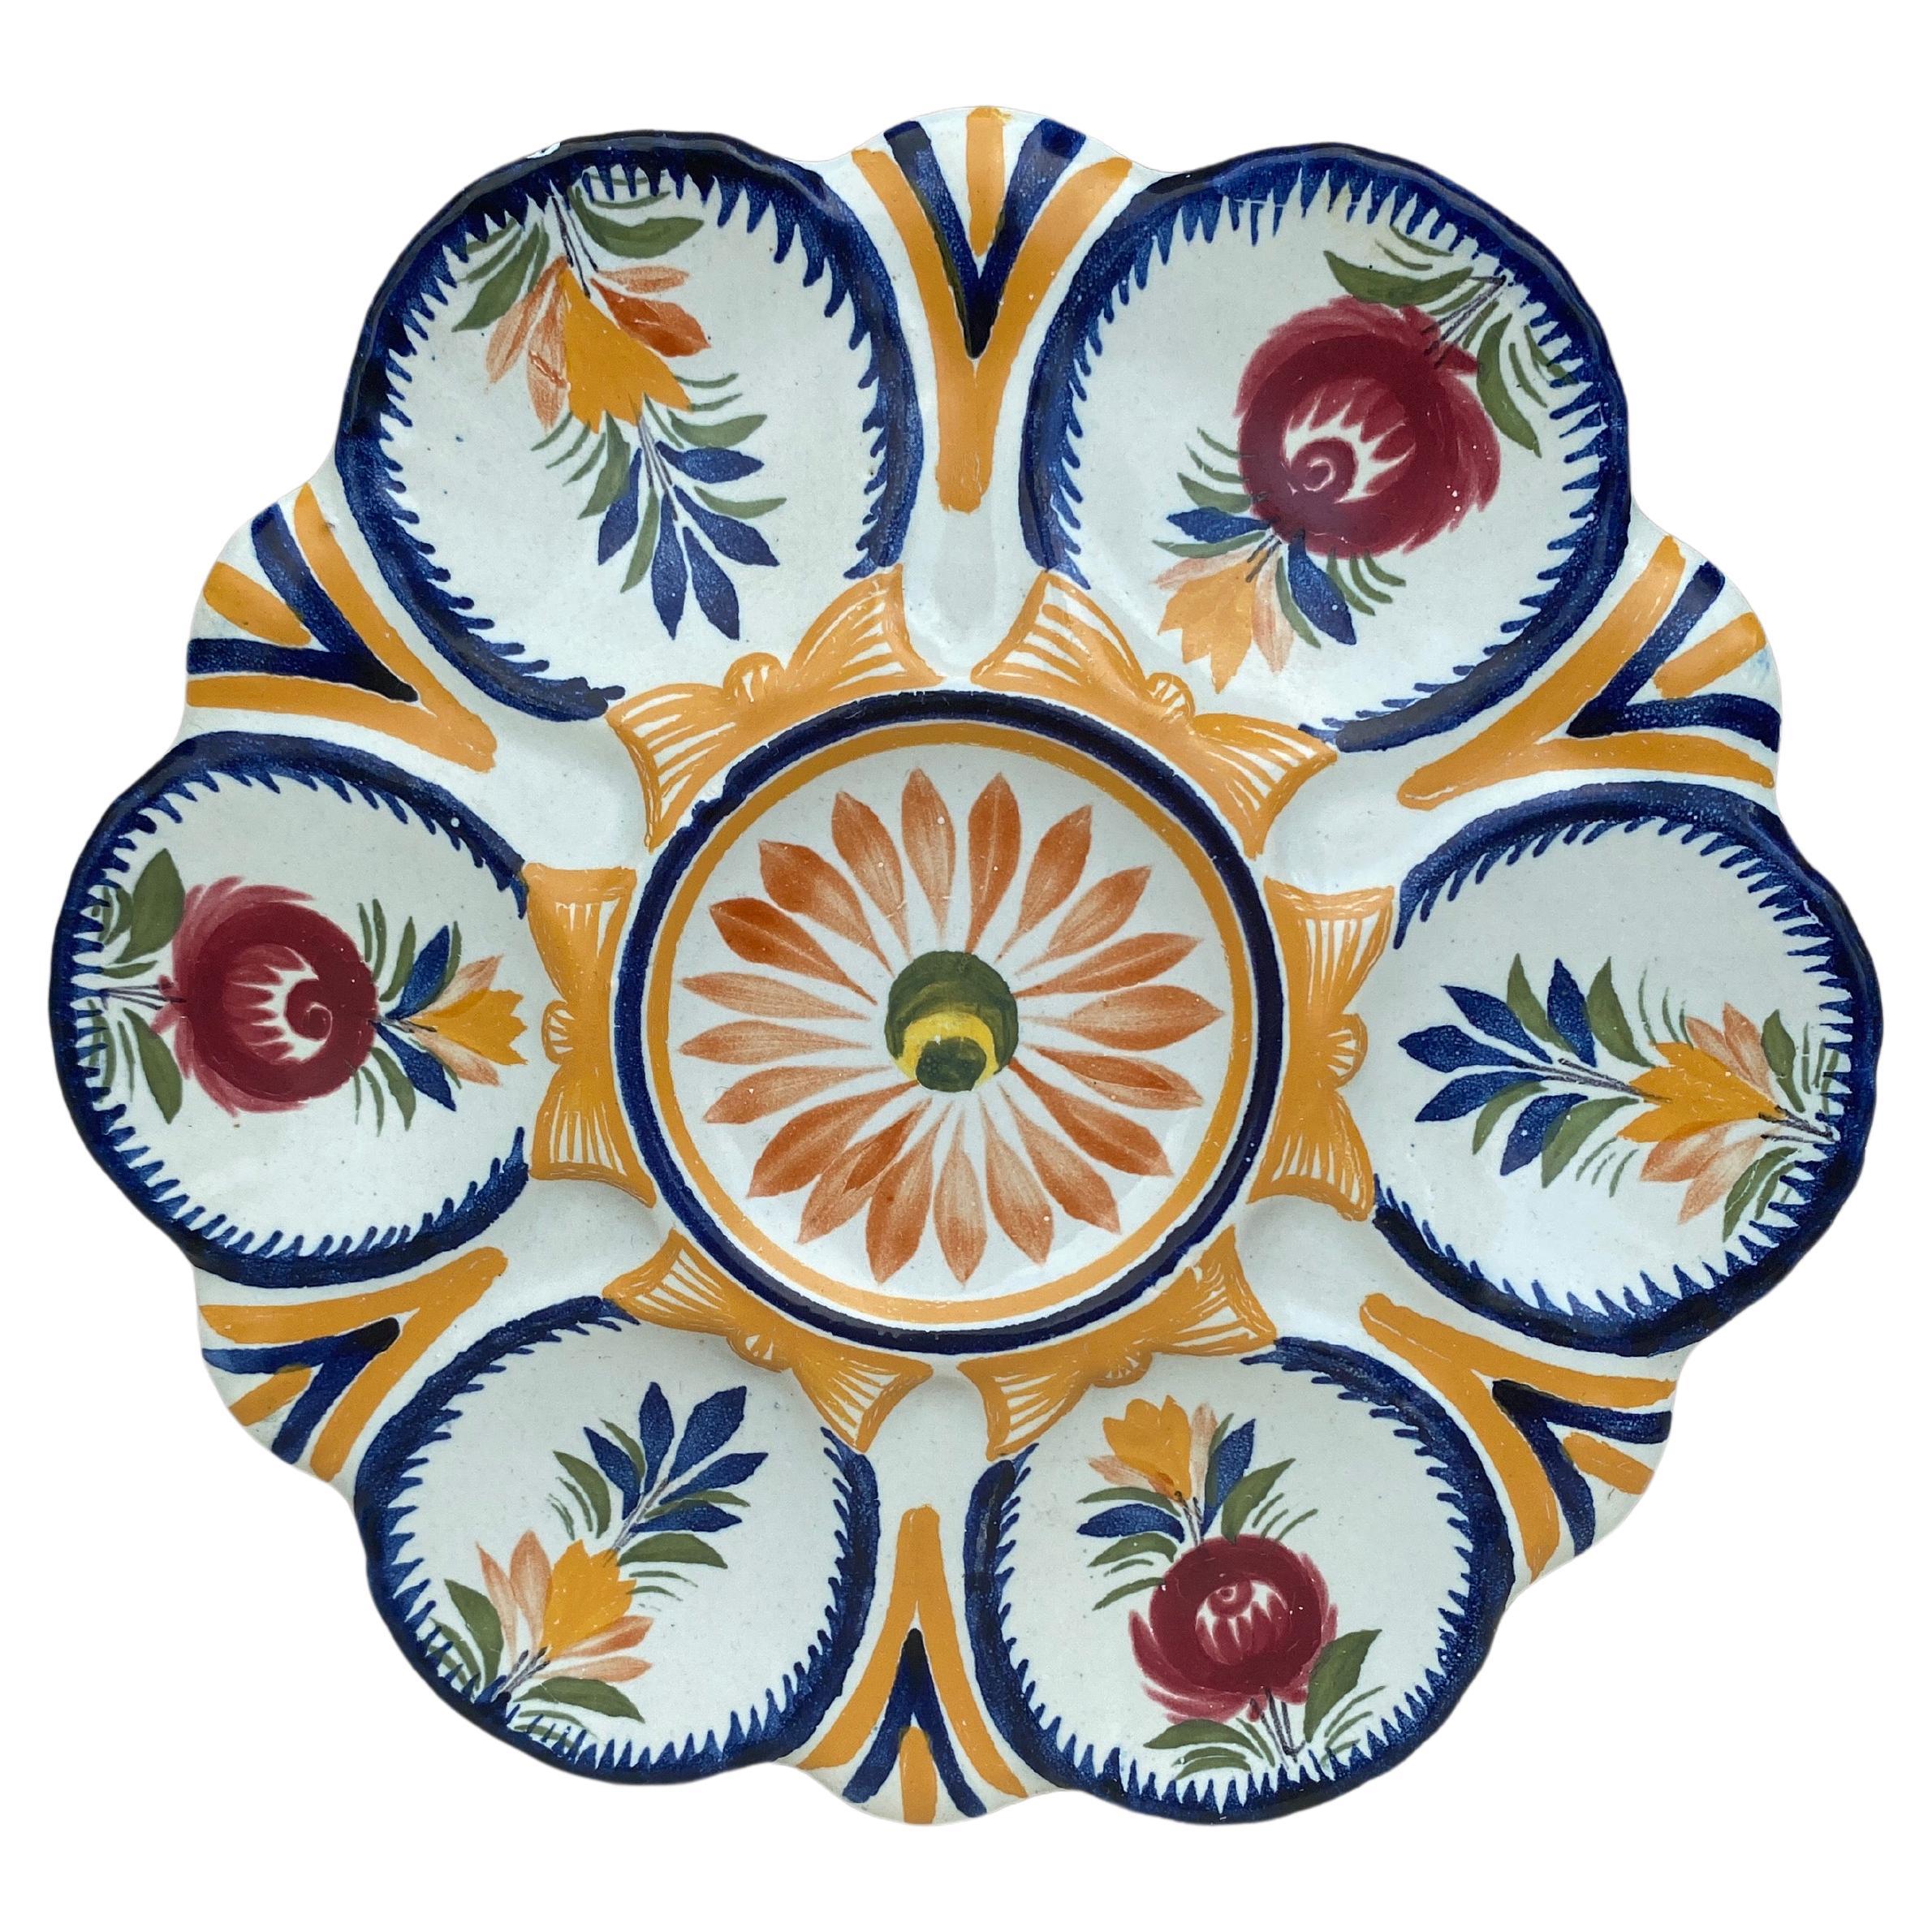 French Faience Oyster Plate Henriot Quimper, circa 1930